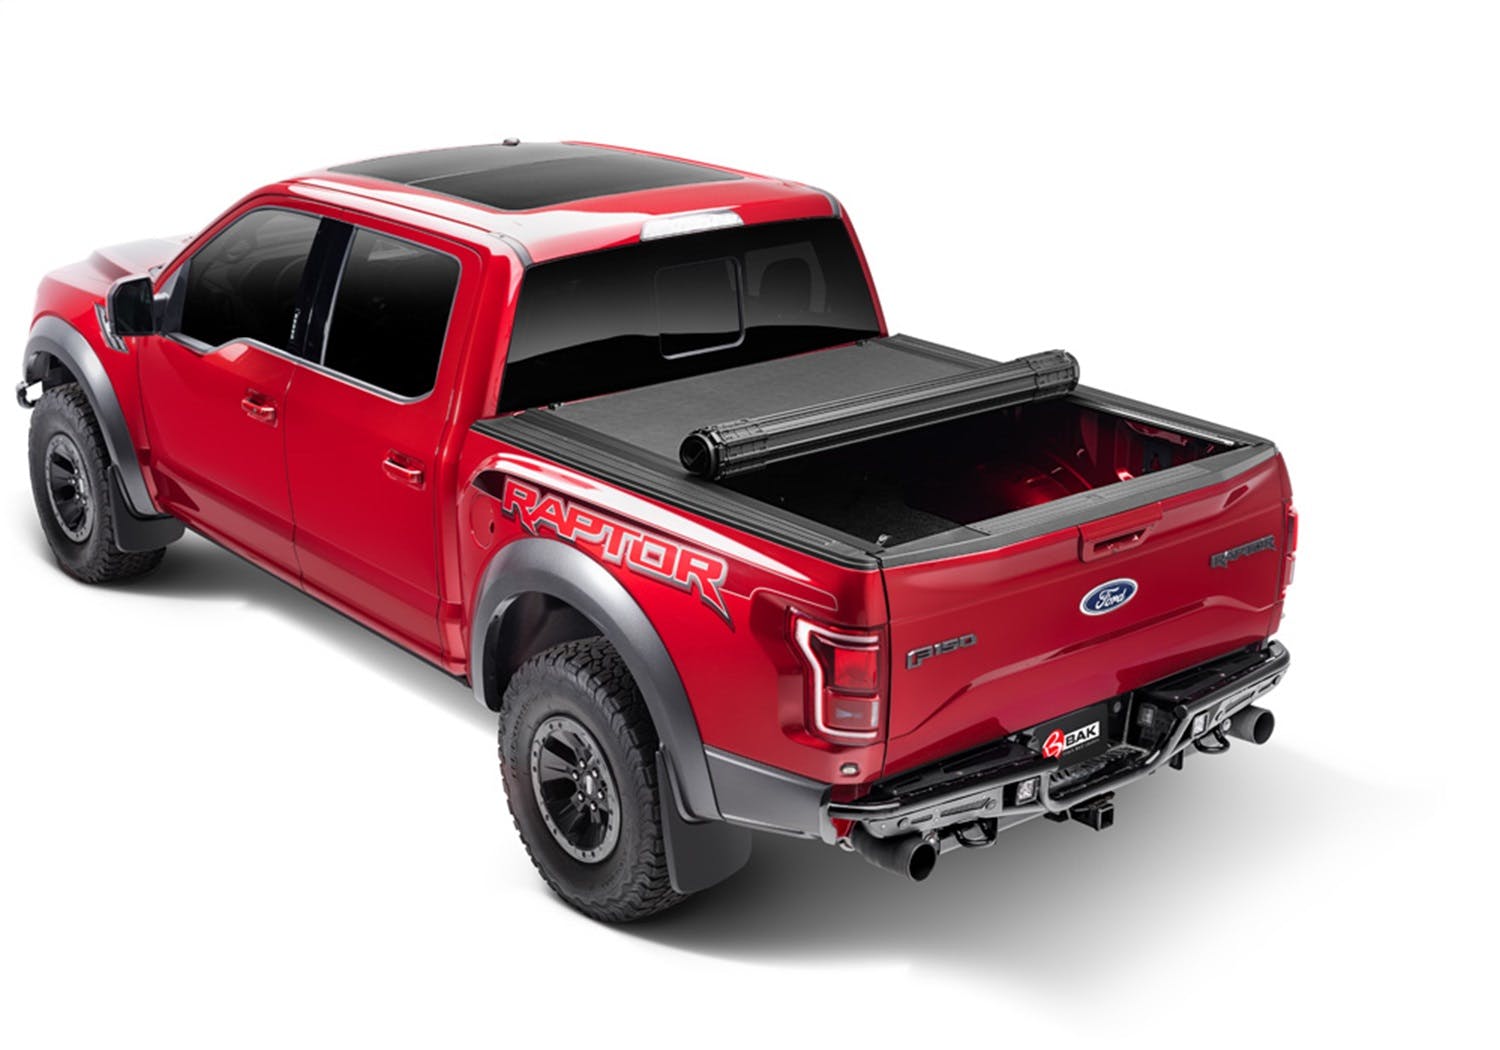 BAK Industries 80331 Revolver X4s Hard Rolling Truck Bed Cover